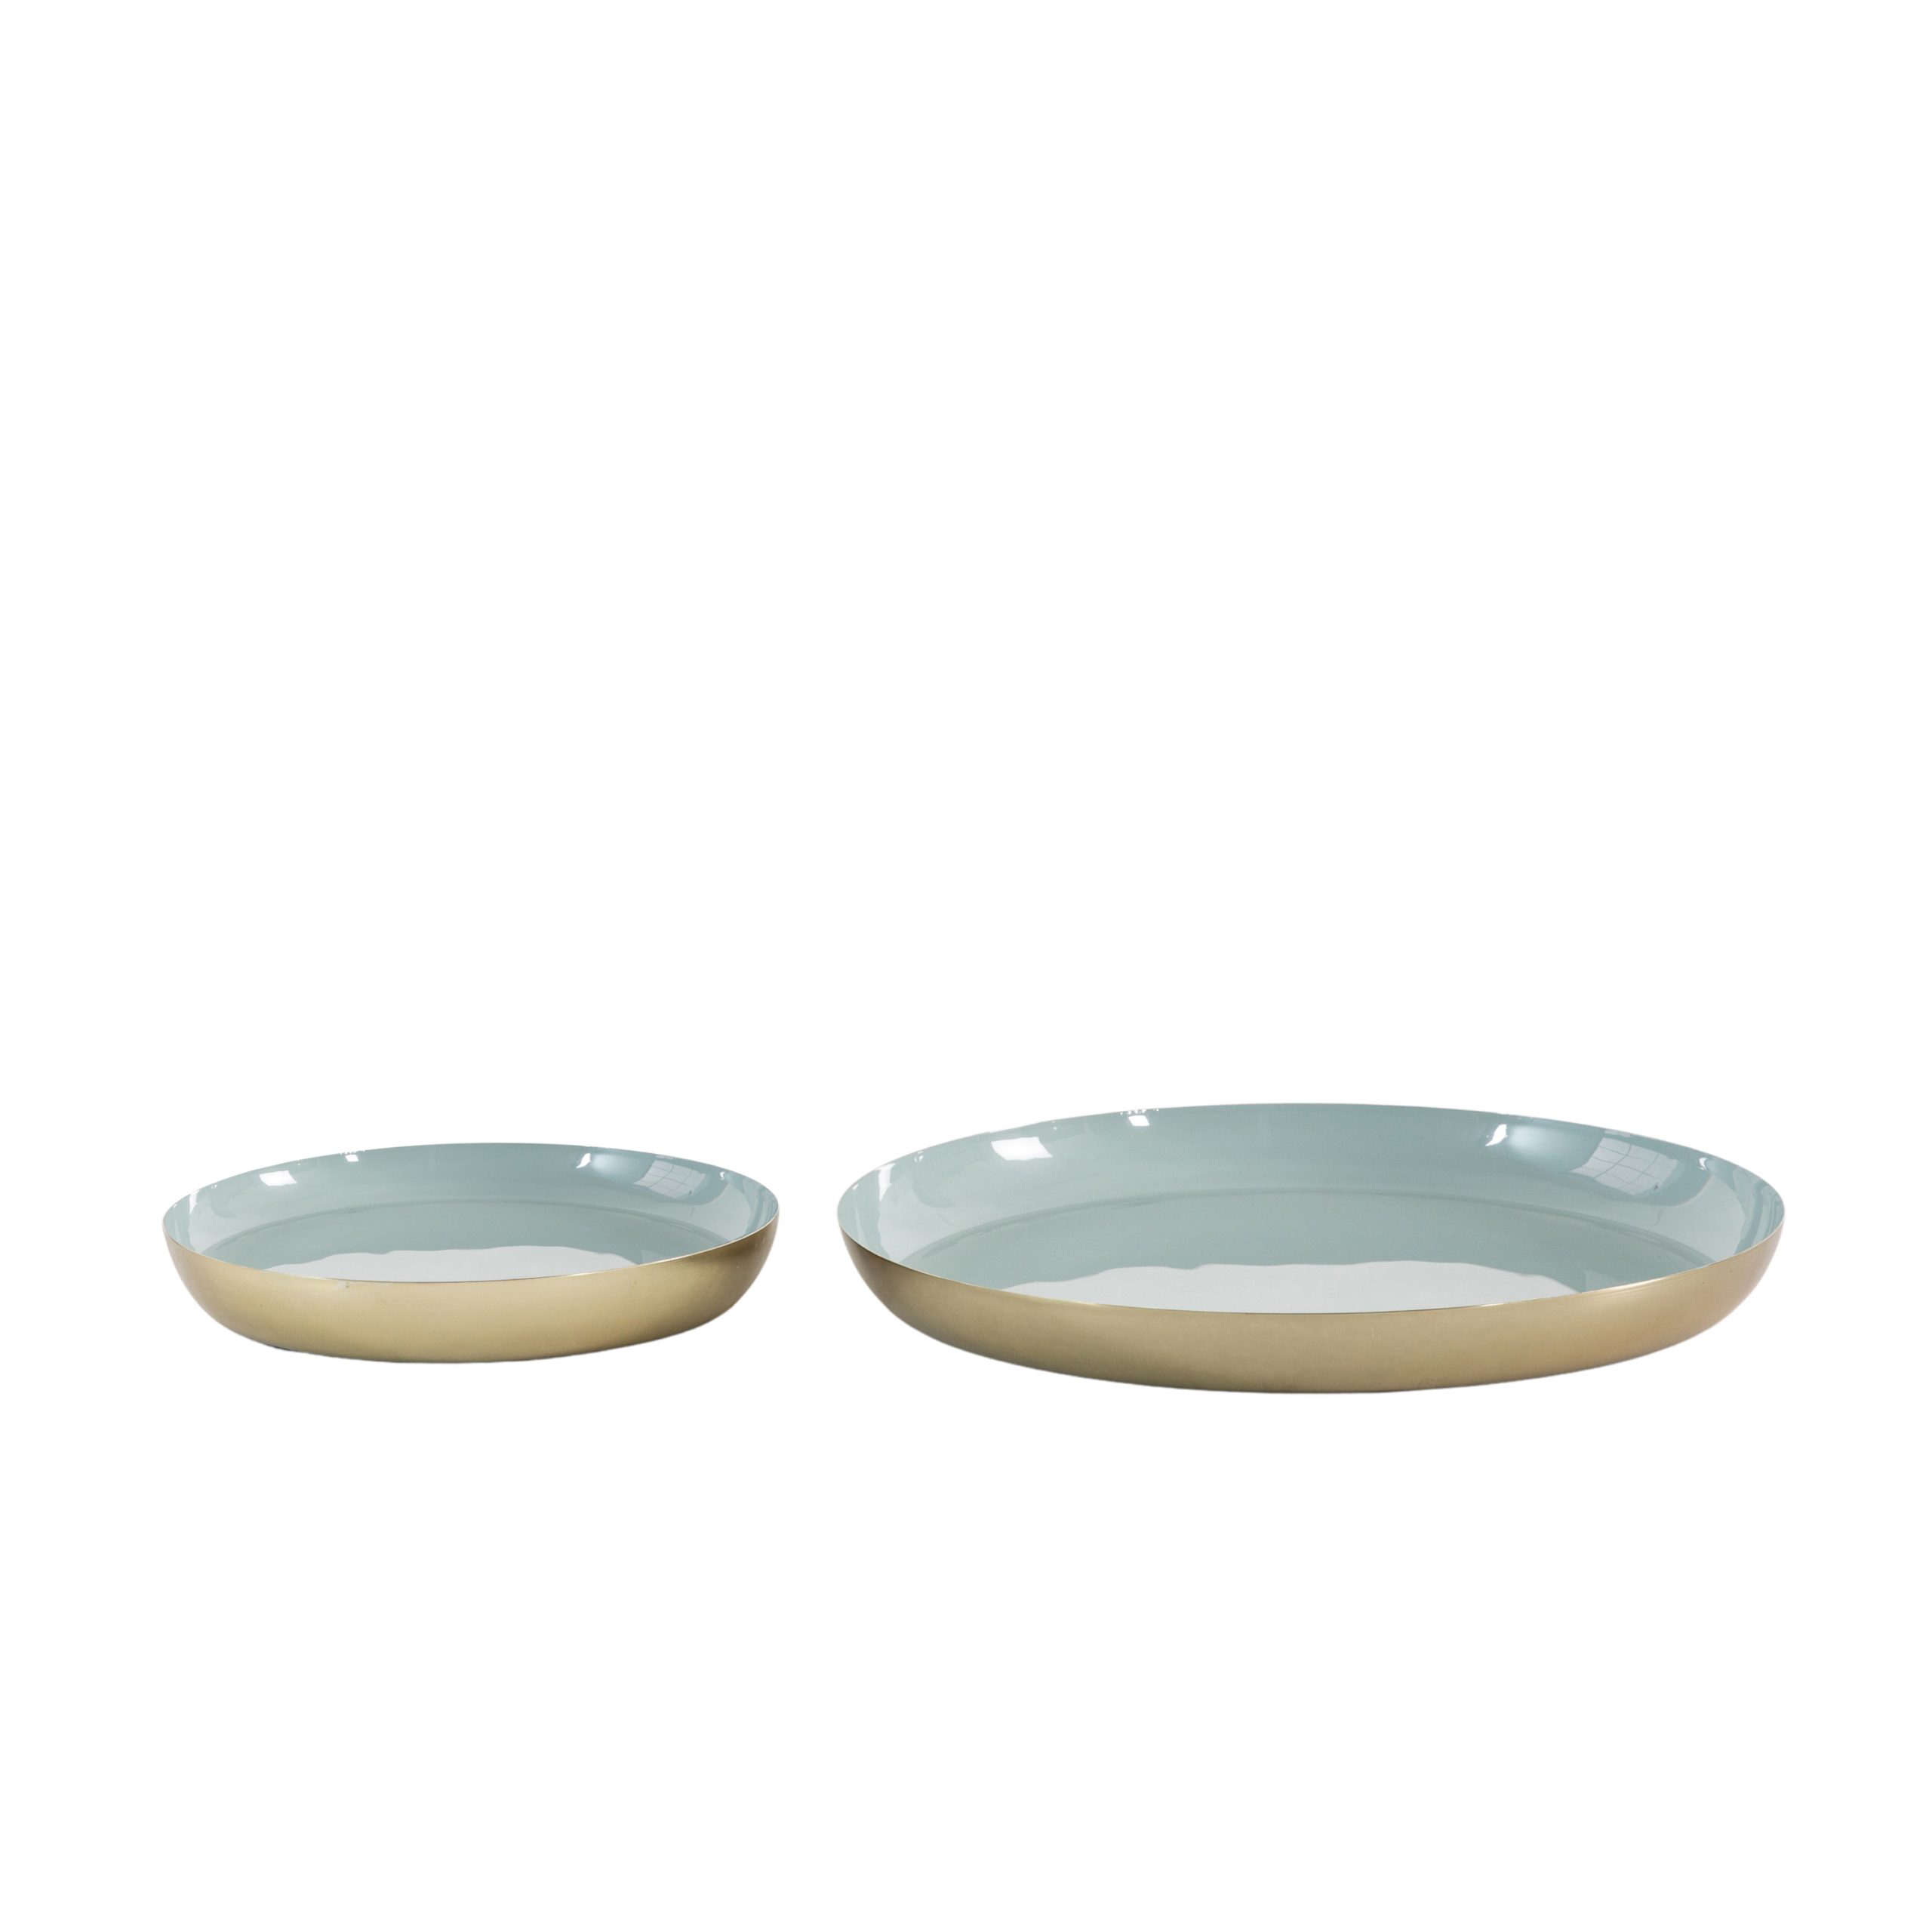 Gallery Direct Cassie Trays Mint/Gold (Set of 2